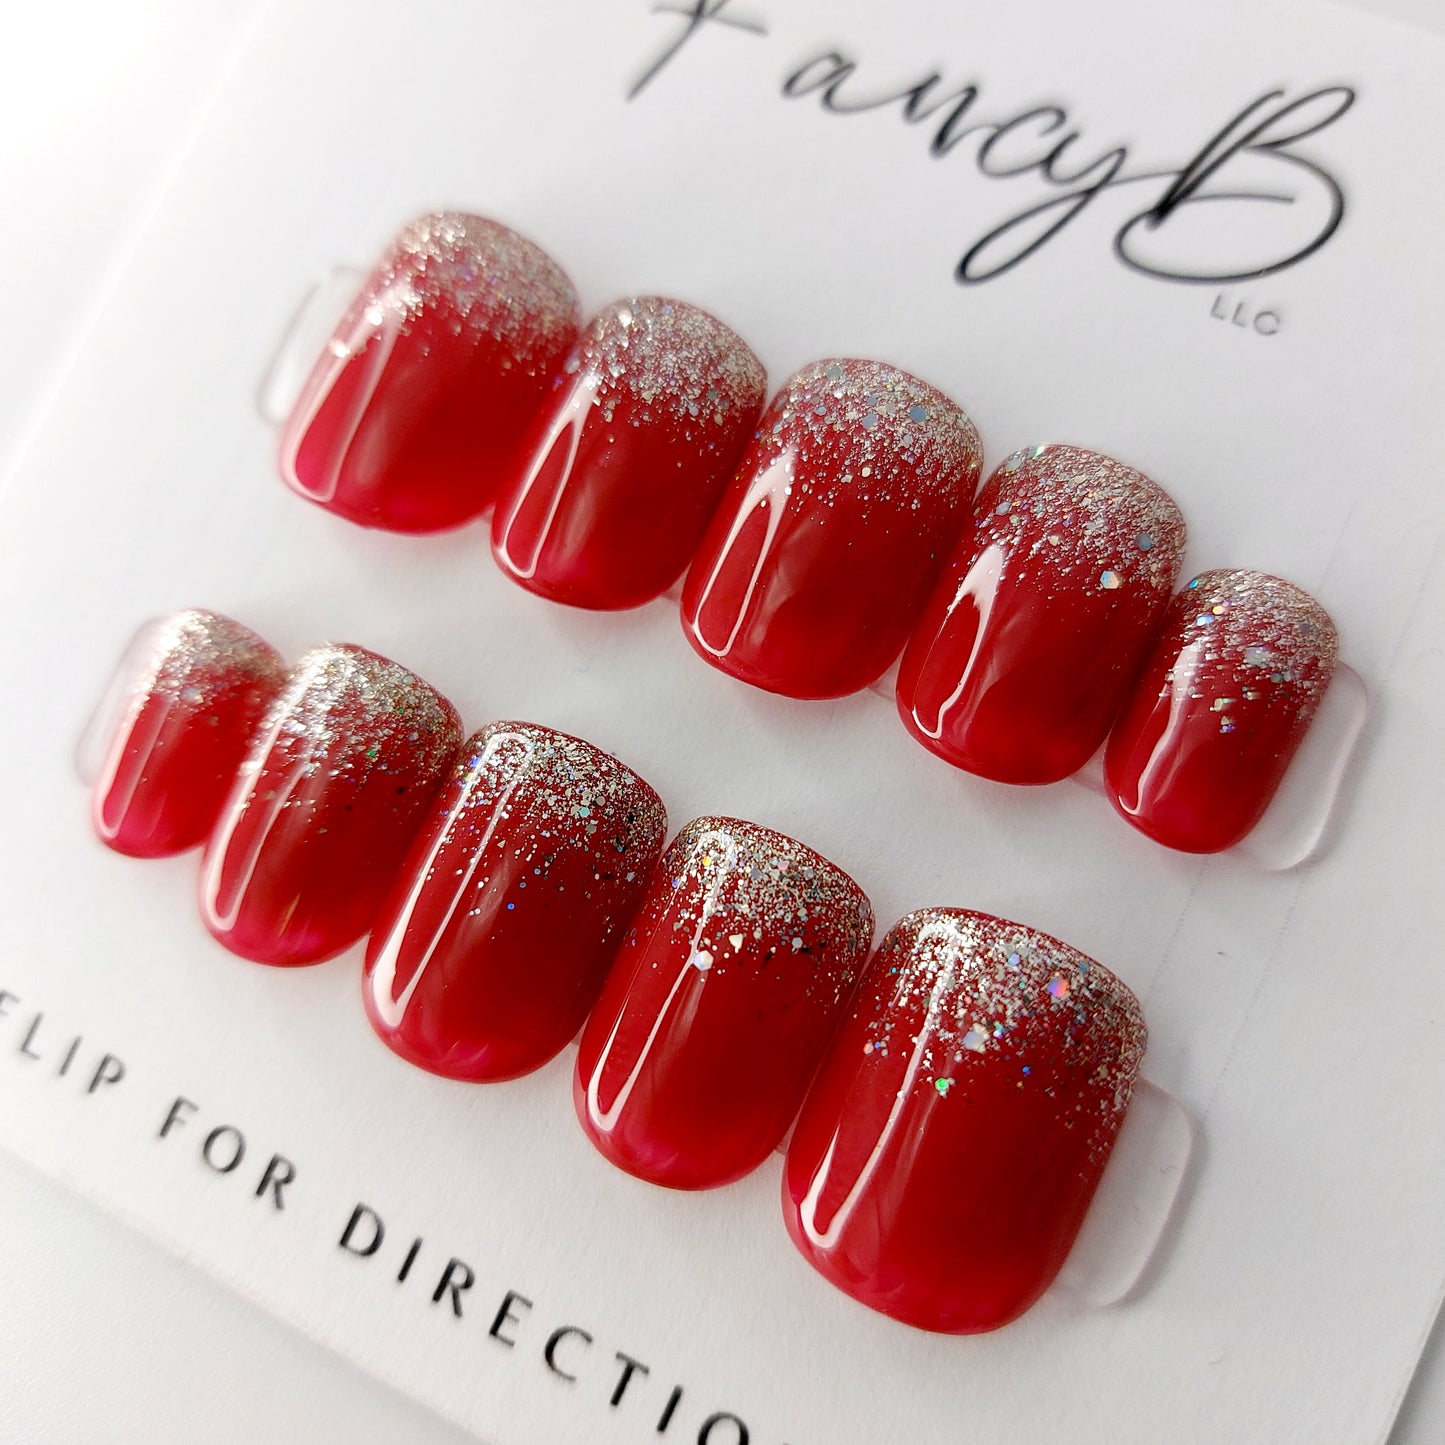 Ruby Glitter Tips with Silver Glitter on Short Squoval Press on Nails. Handmade, resuable press ons. Fancyb nails.